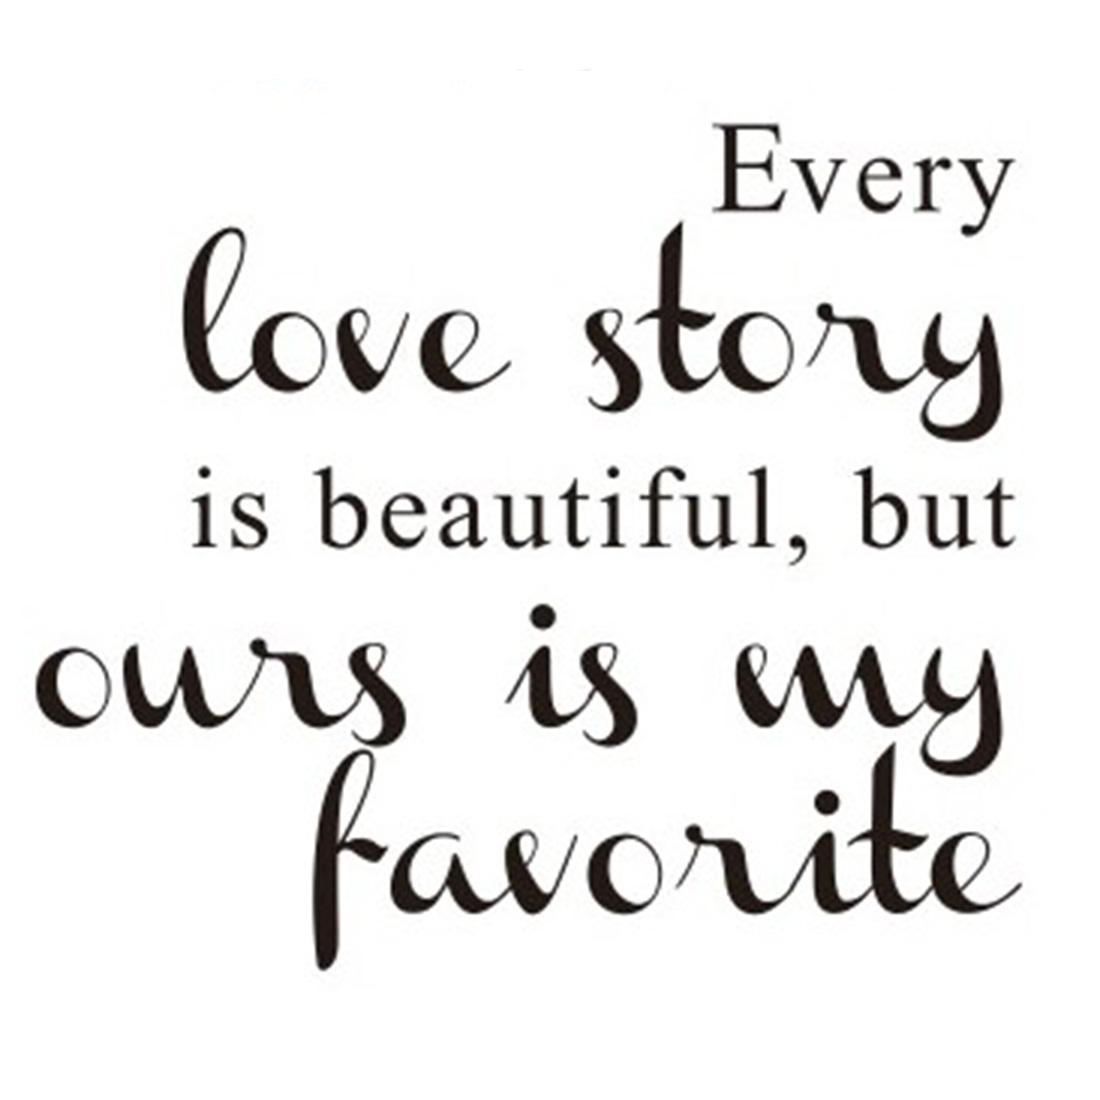 Home Decor Sayings 360dsc Zooyoo Every Love Story Is Beautiful But Ours Is My